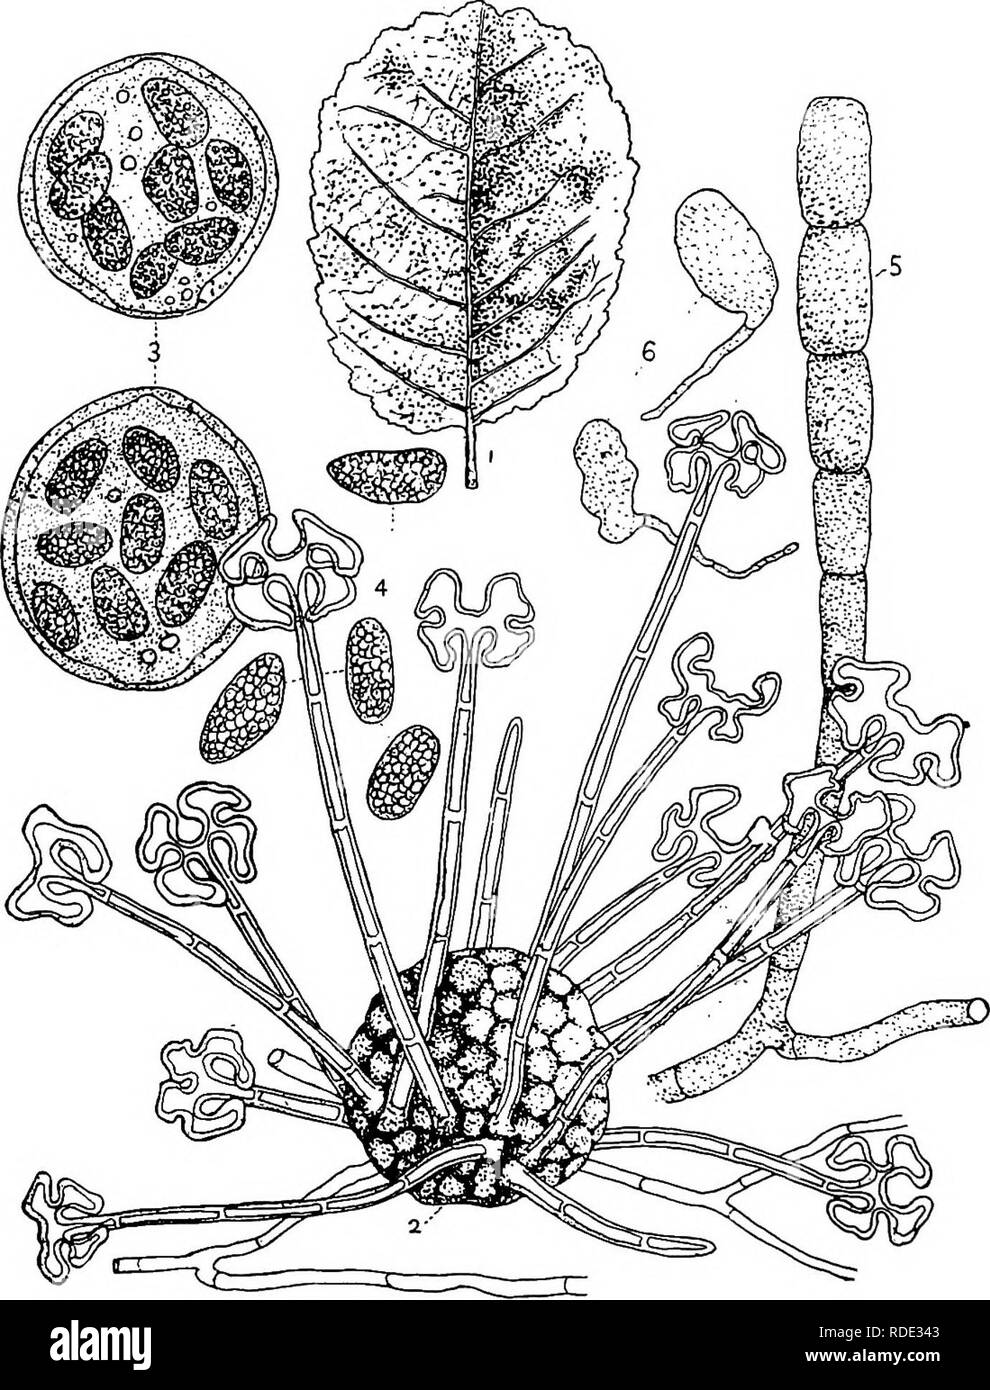 . Minnesota plant diseases. Plant diseases. i6o Minnesota Plant Diseases. The fungus can be held in check by a persistent pruning off of the l&lt;nots. Such a pruning prevents the spread of the myce- lium in the tissues of the host. The knots should be immediately. Fig. 192.—Powdery mildew of plums and cherries. 1. Cherry leaf. 2. Spore-sac capsule showing the thread appendages with peculiar forking ends. 3. Spore-sacs, each with eight spores. 4. Very highly magnified spores. 5. A chain of summer spores. 6. Two summer spores germinating. All except 1, highly magnified. After Ellis. burned. Car Stock Photo